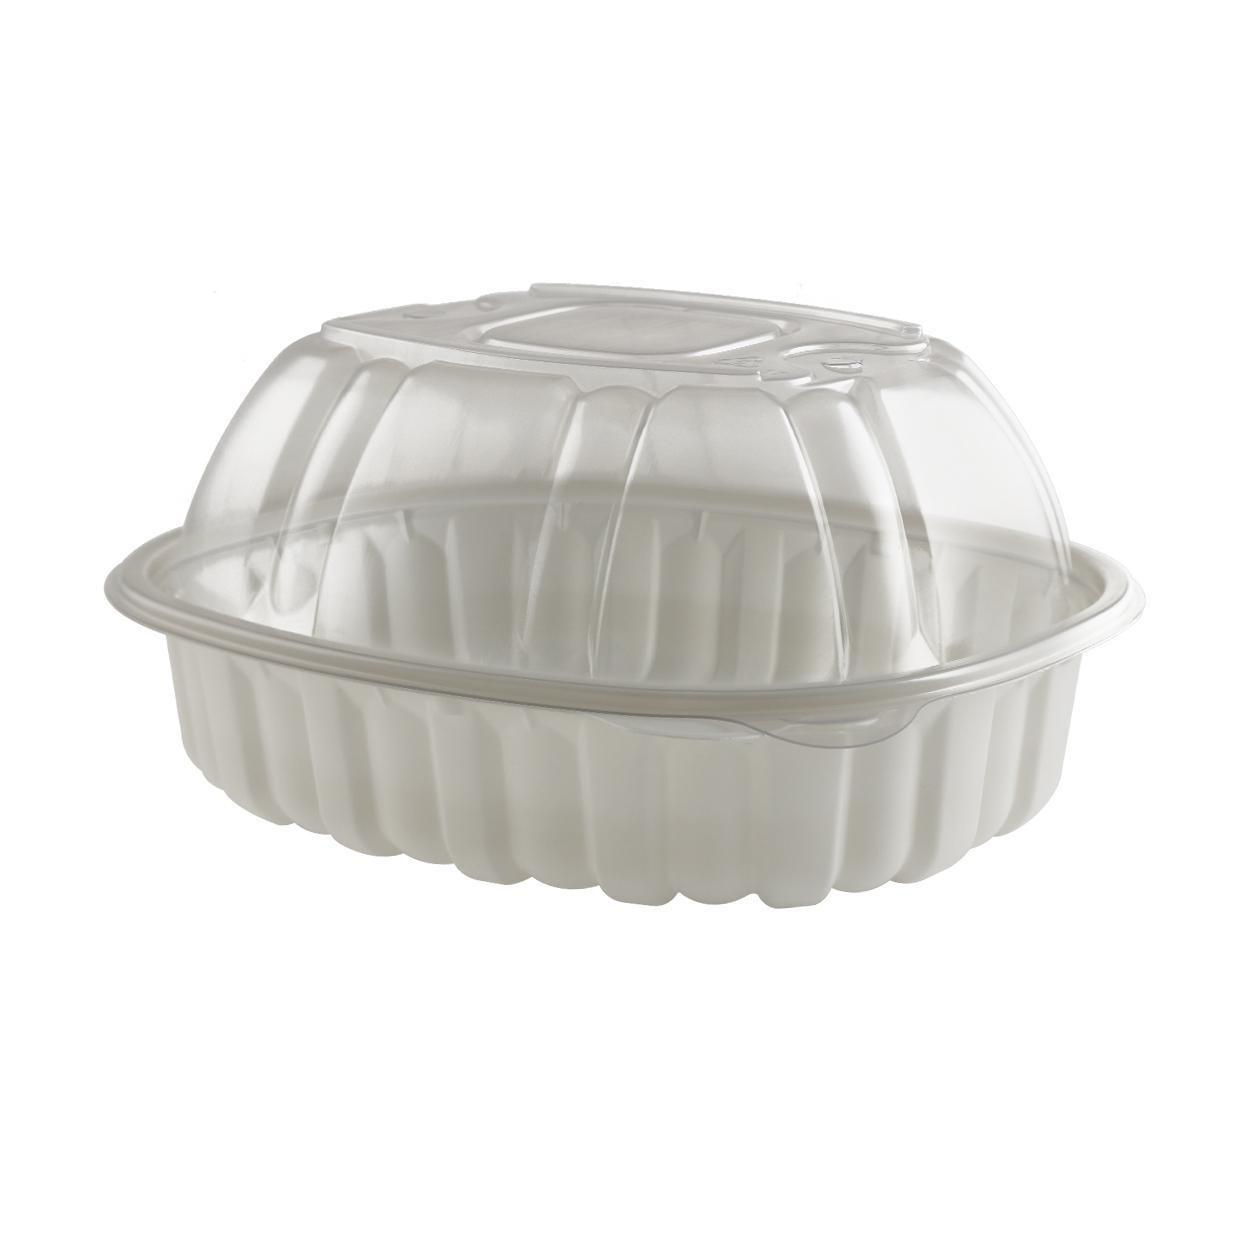 Take-Out Container Base & Lid Combo With Flat Lid 6 Compartment